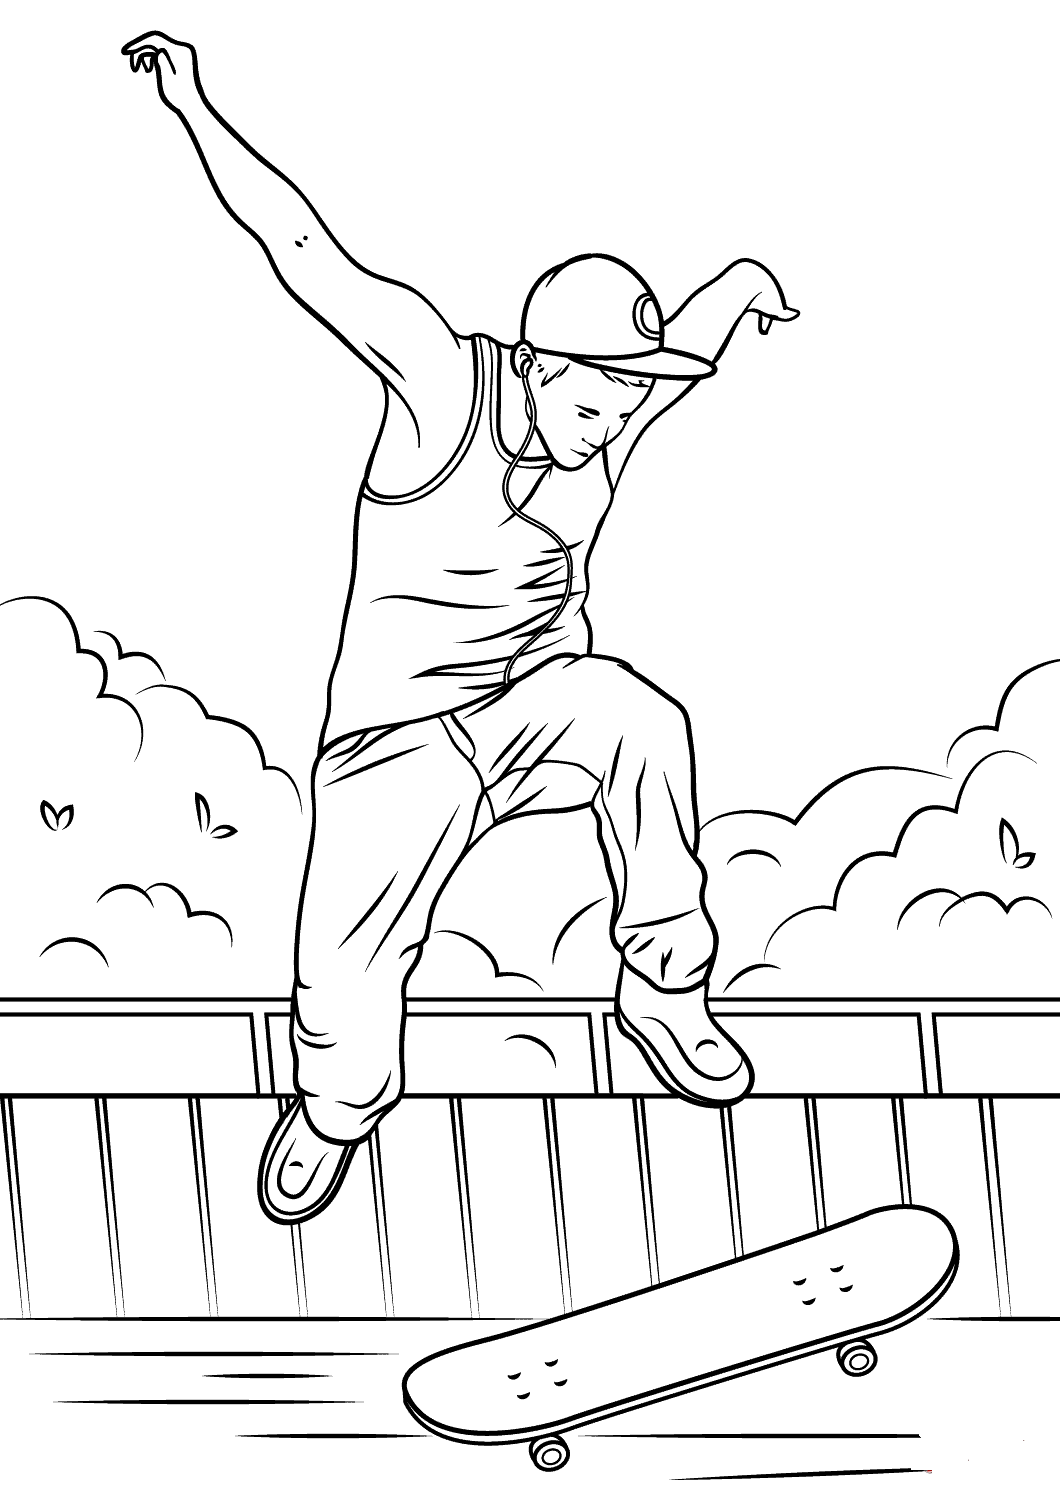 adult skateboarding coloring pages